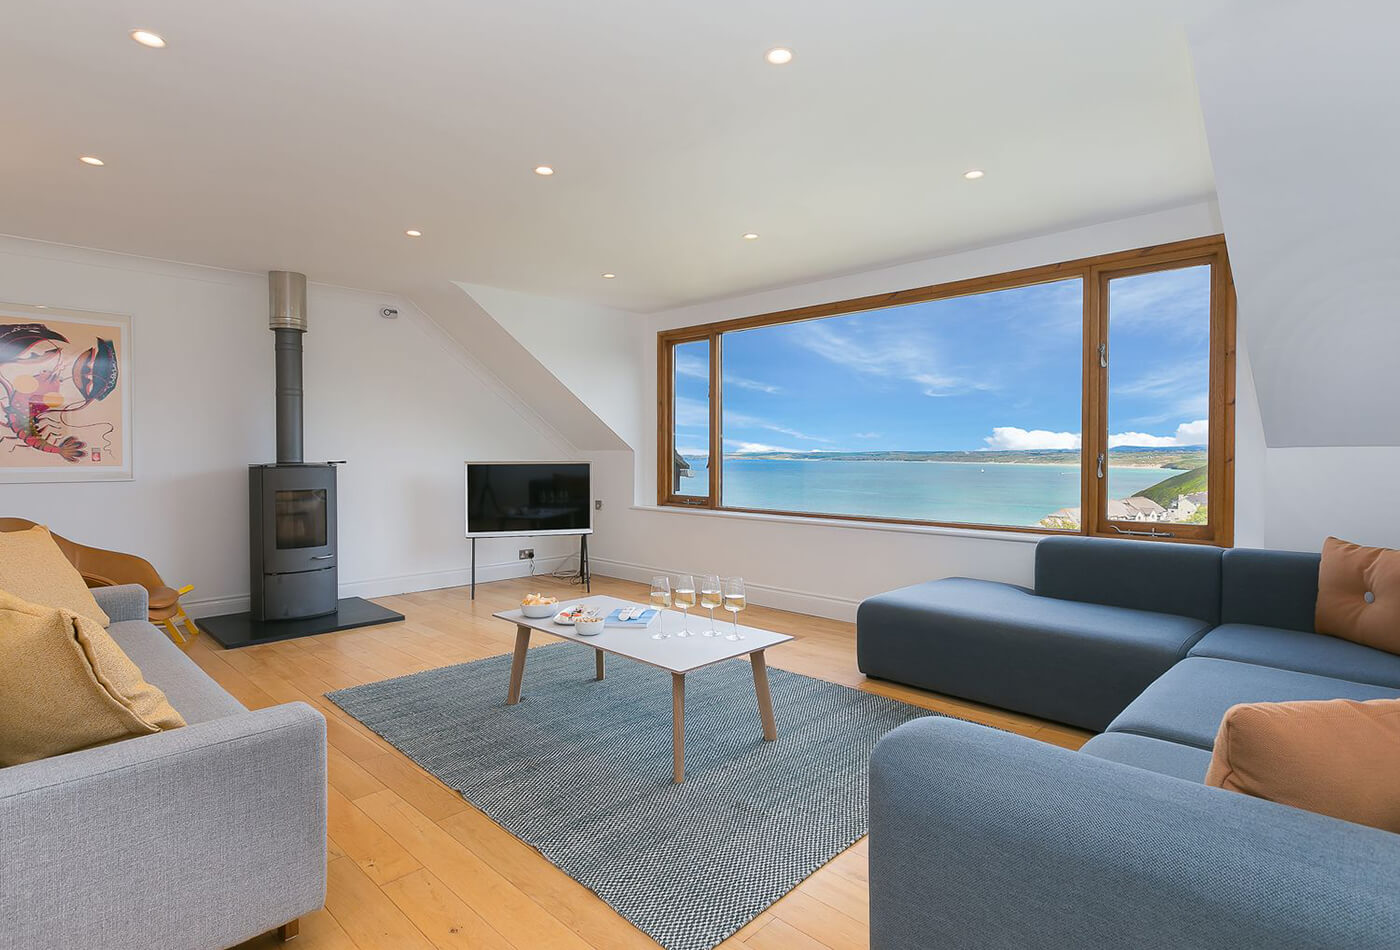 Bayside living area with sea view - thinking of buying a holiday let in st ives.